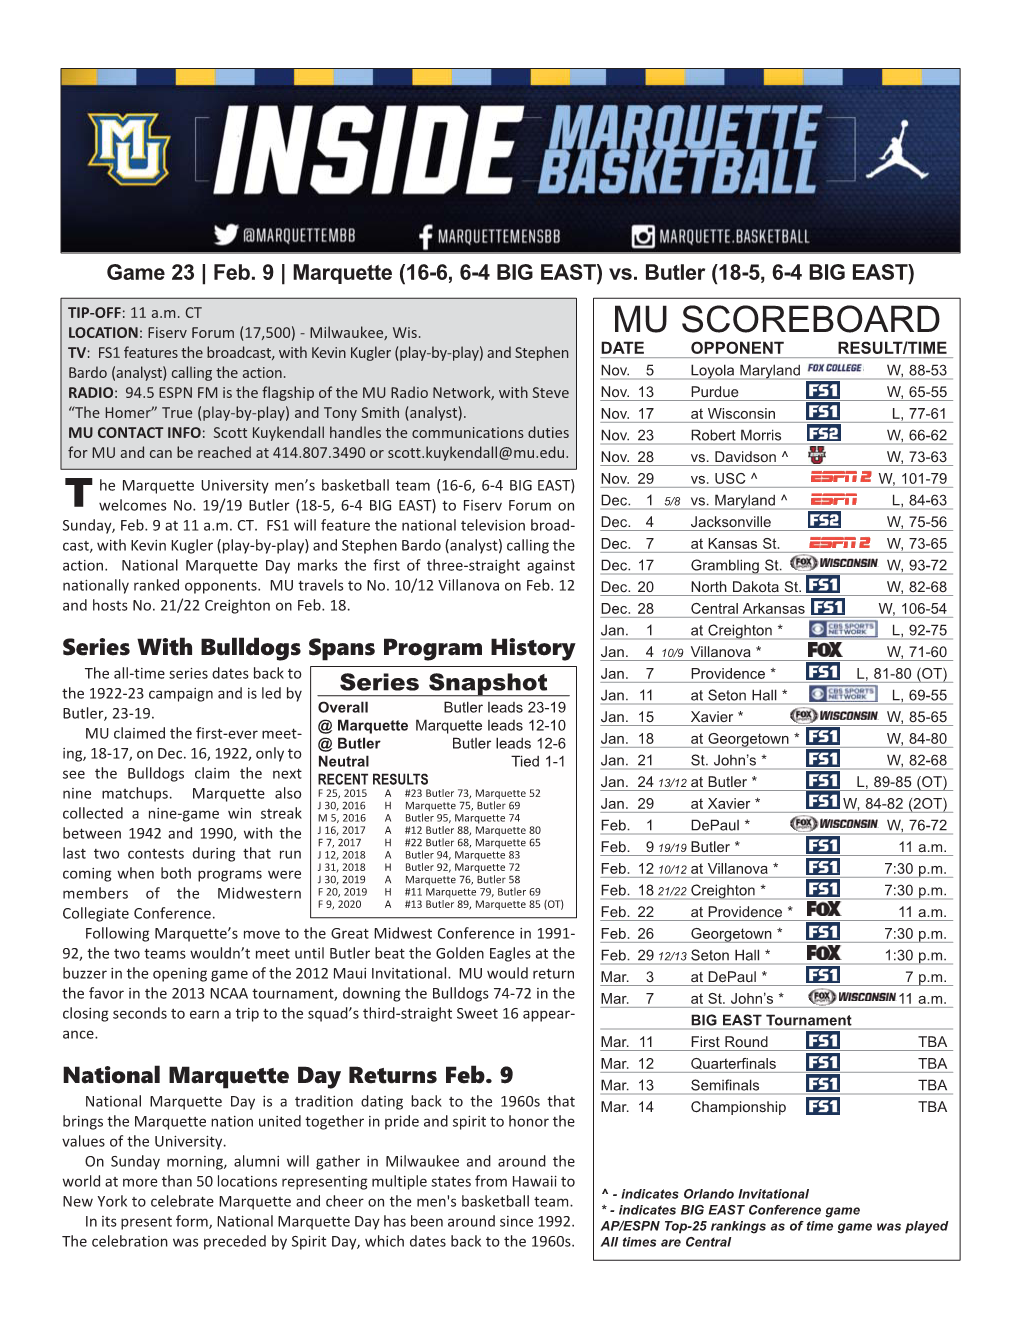 Marquette Game Notes Page 2 INJURY REPORT LAST GAME STARTERS Player (Injury) Status NAME POS